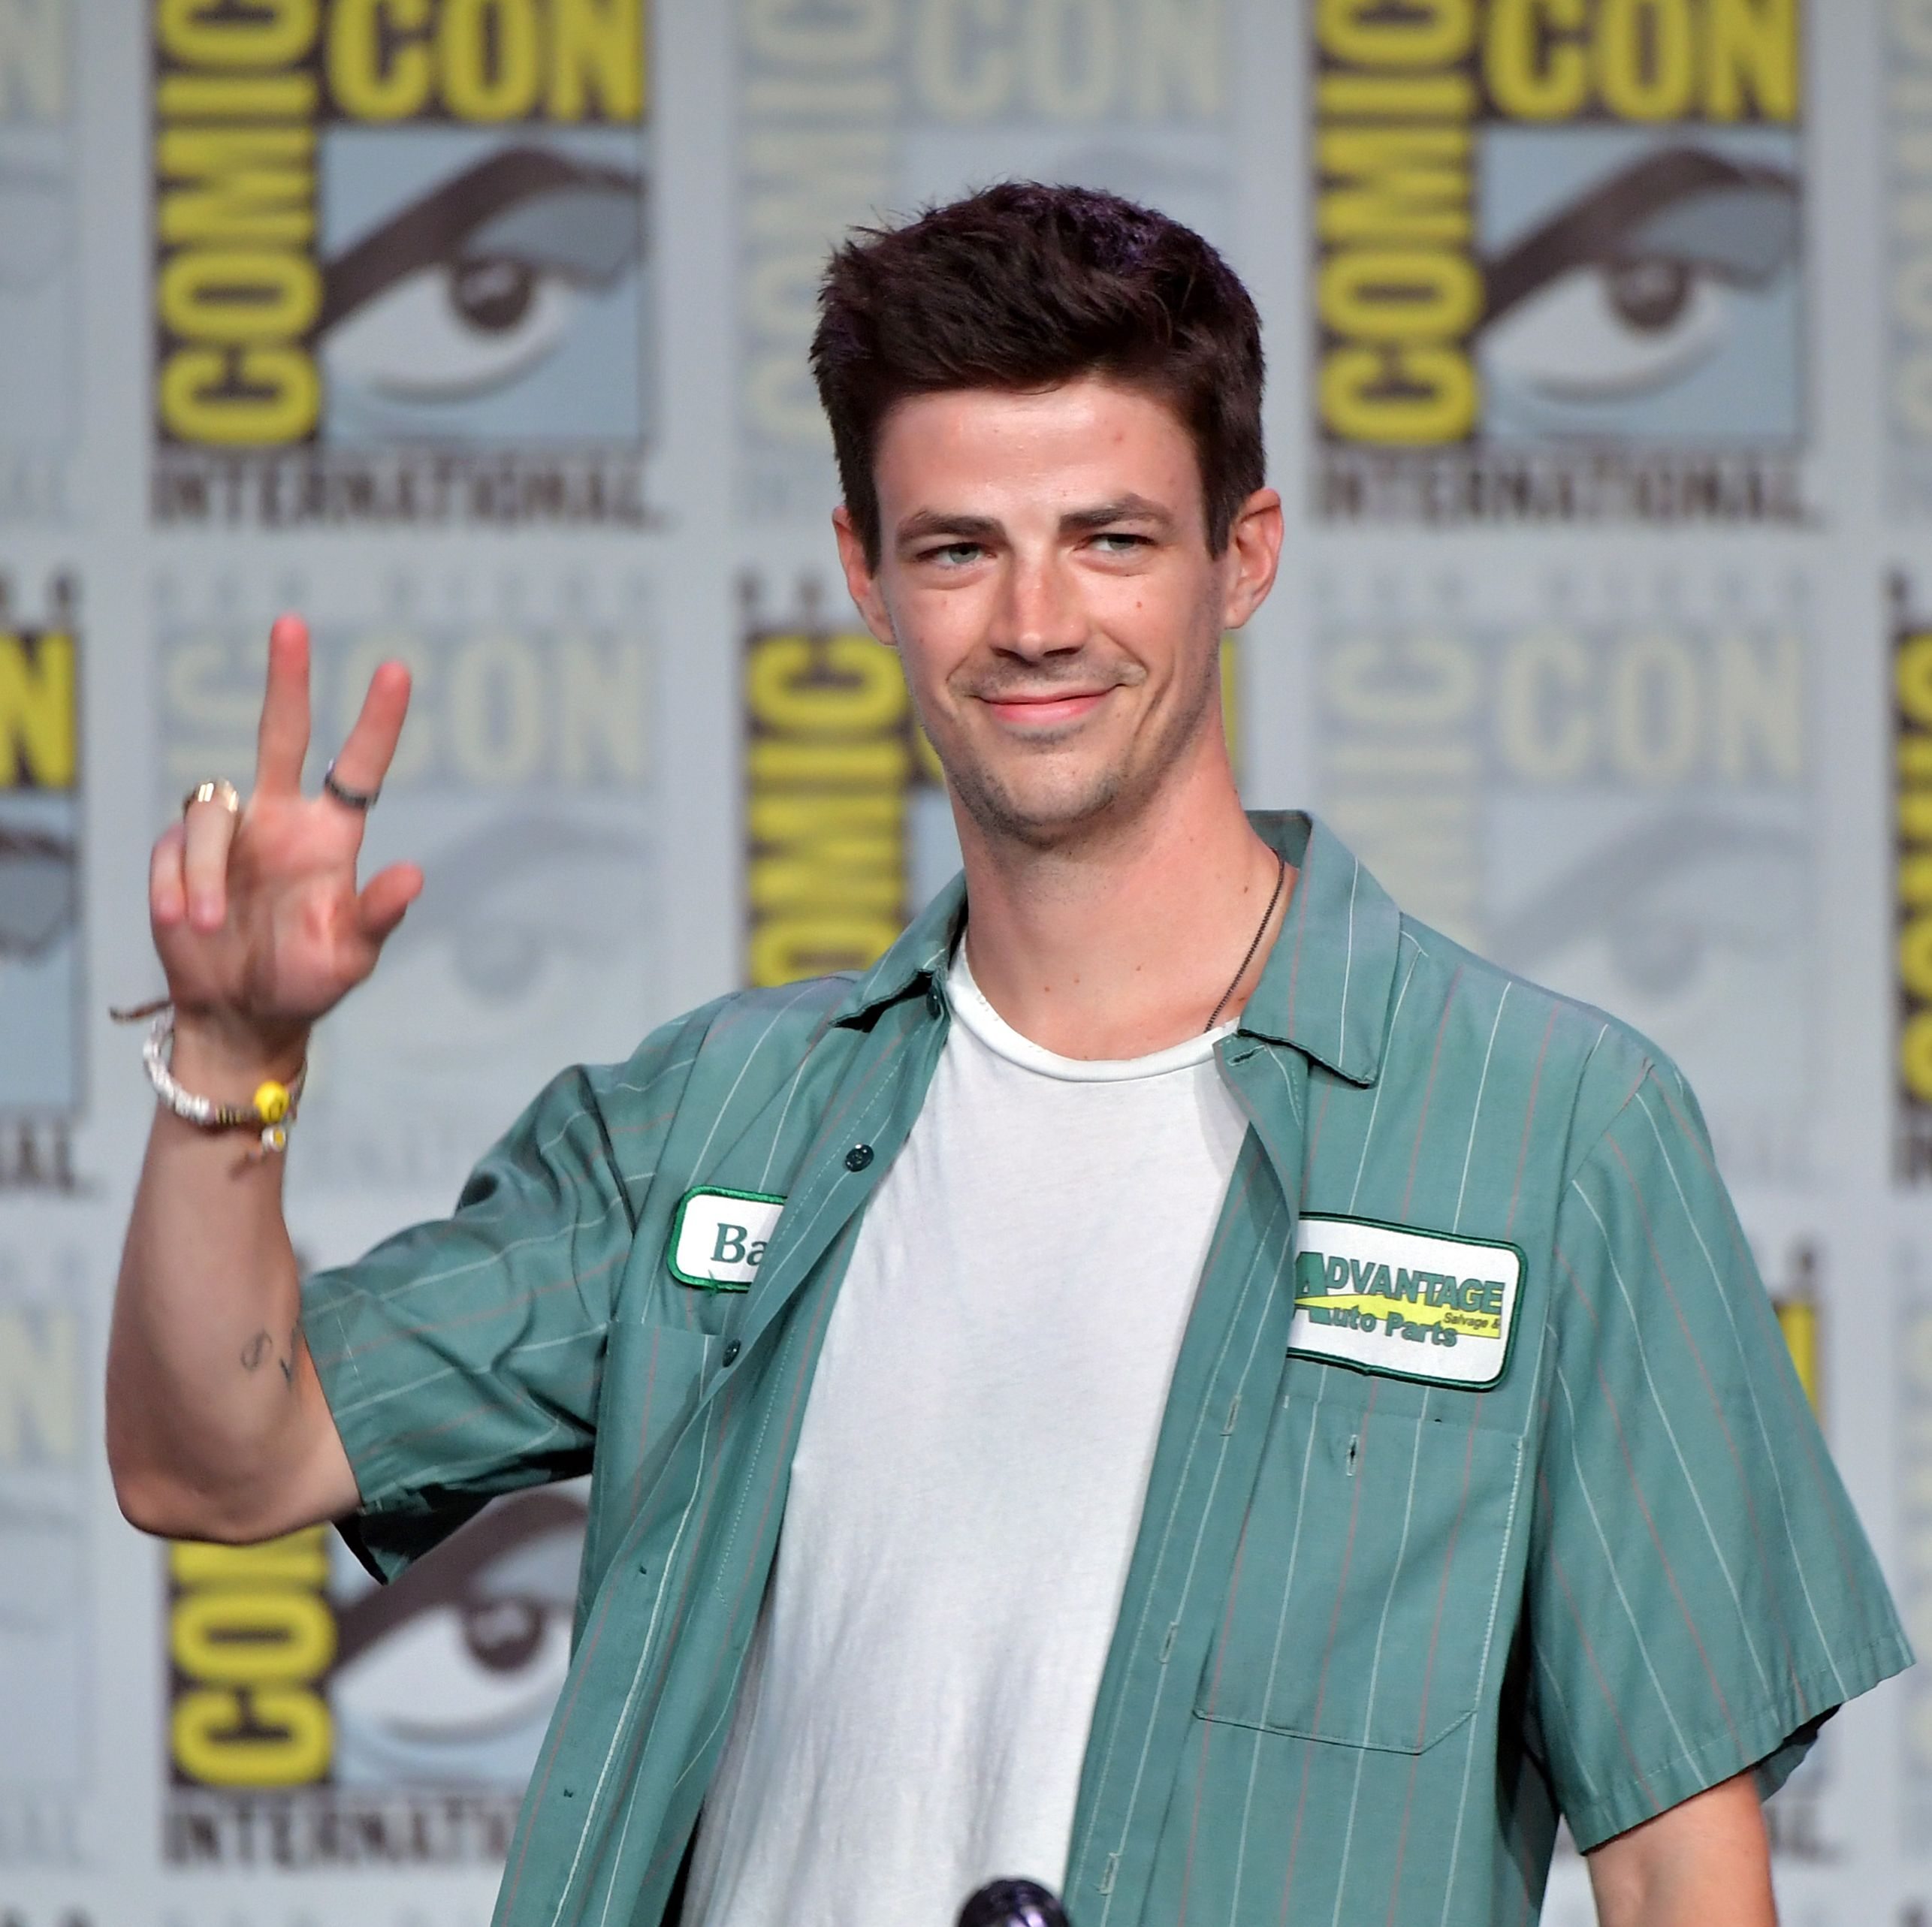 Watch 'The Flash' Star Grant Gustin Crush an Intense Full Body Workout